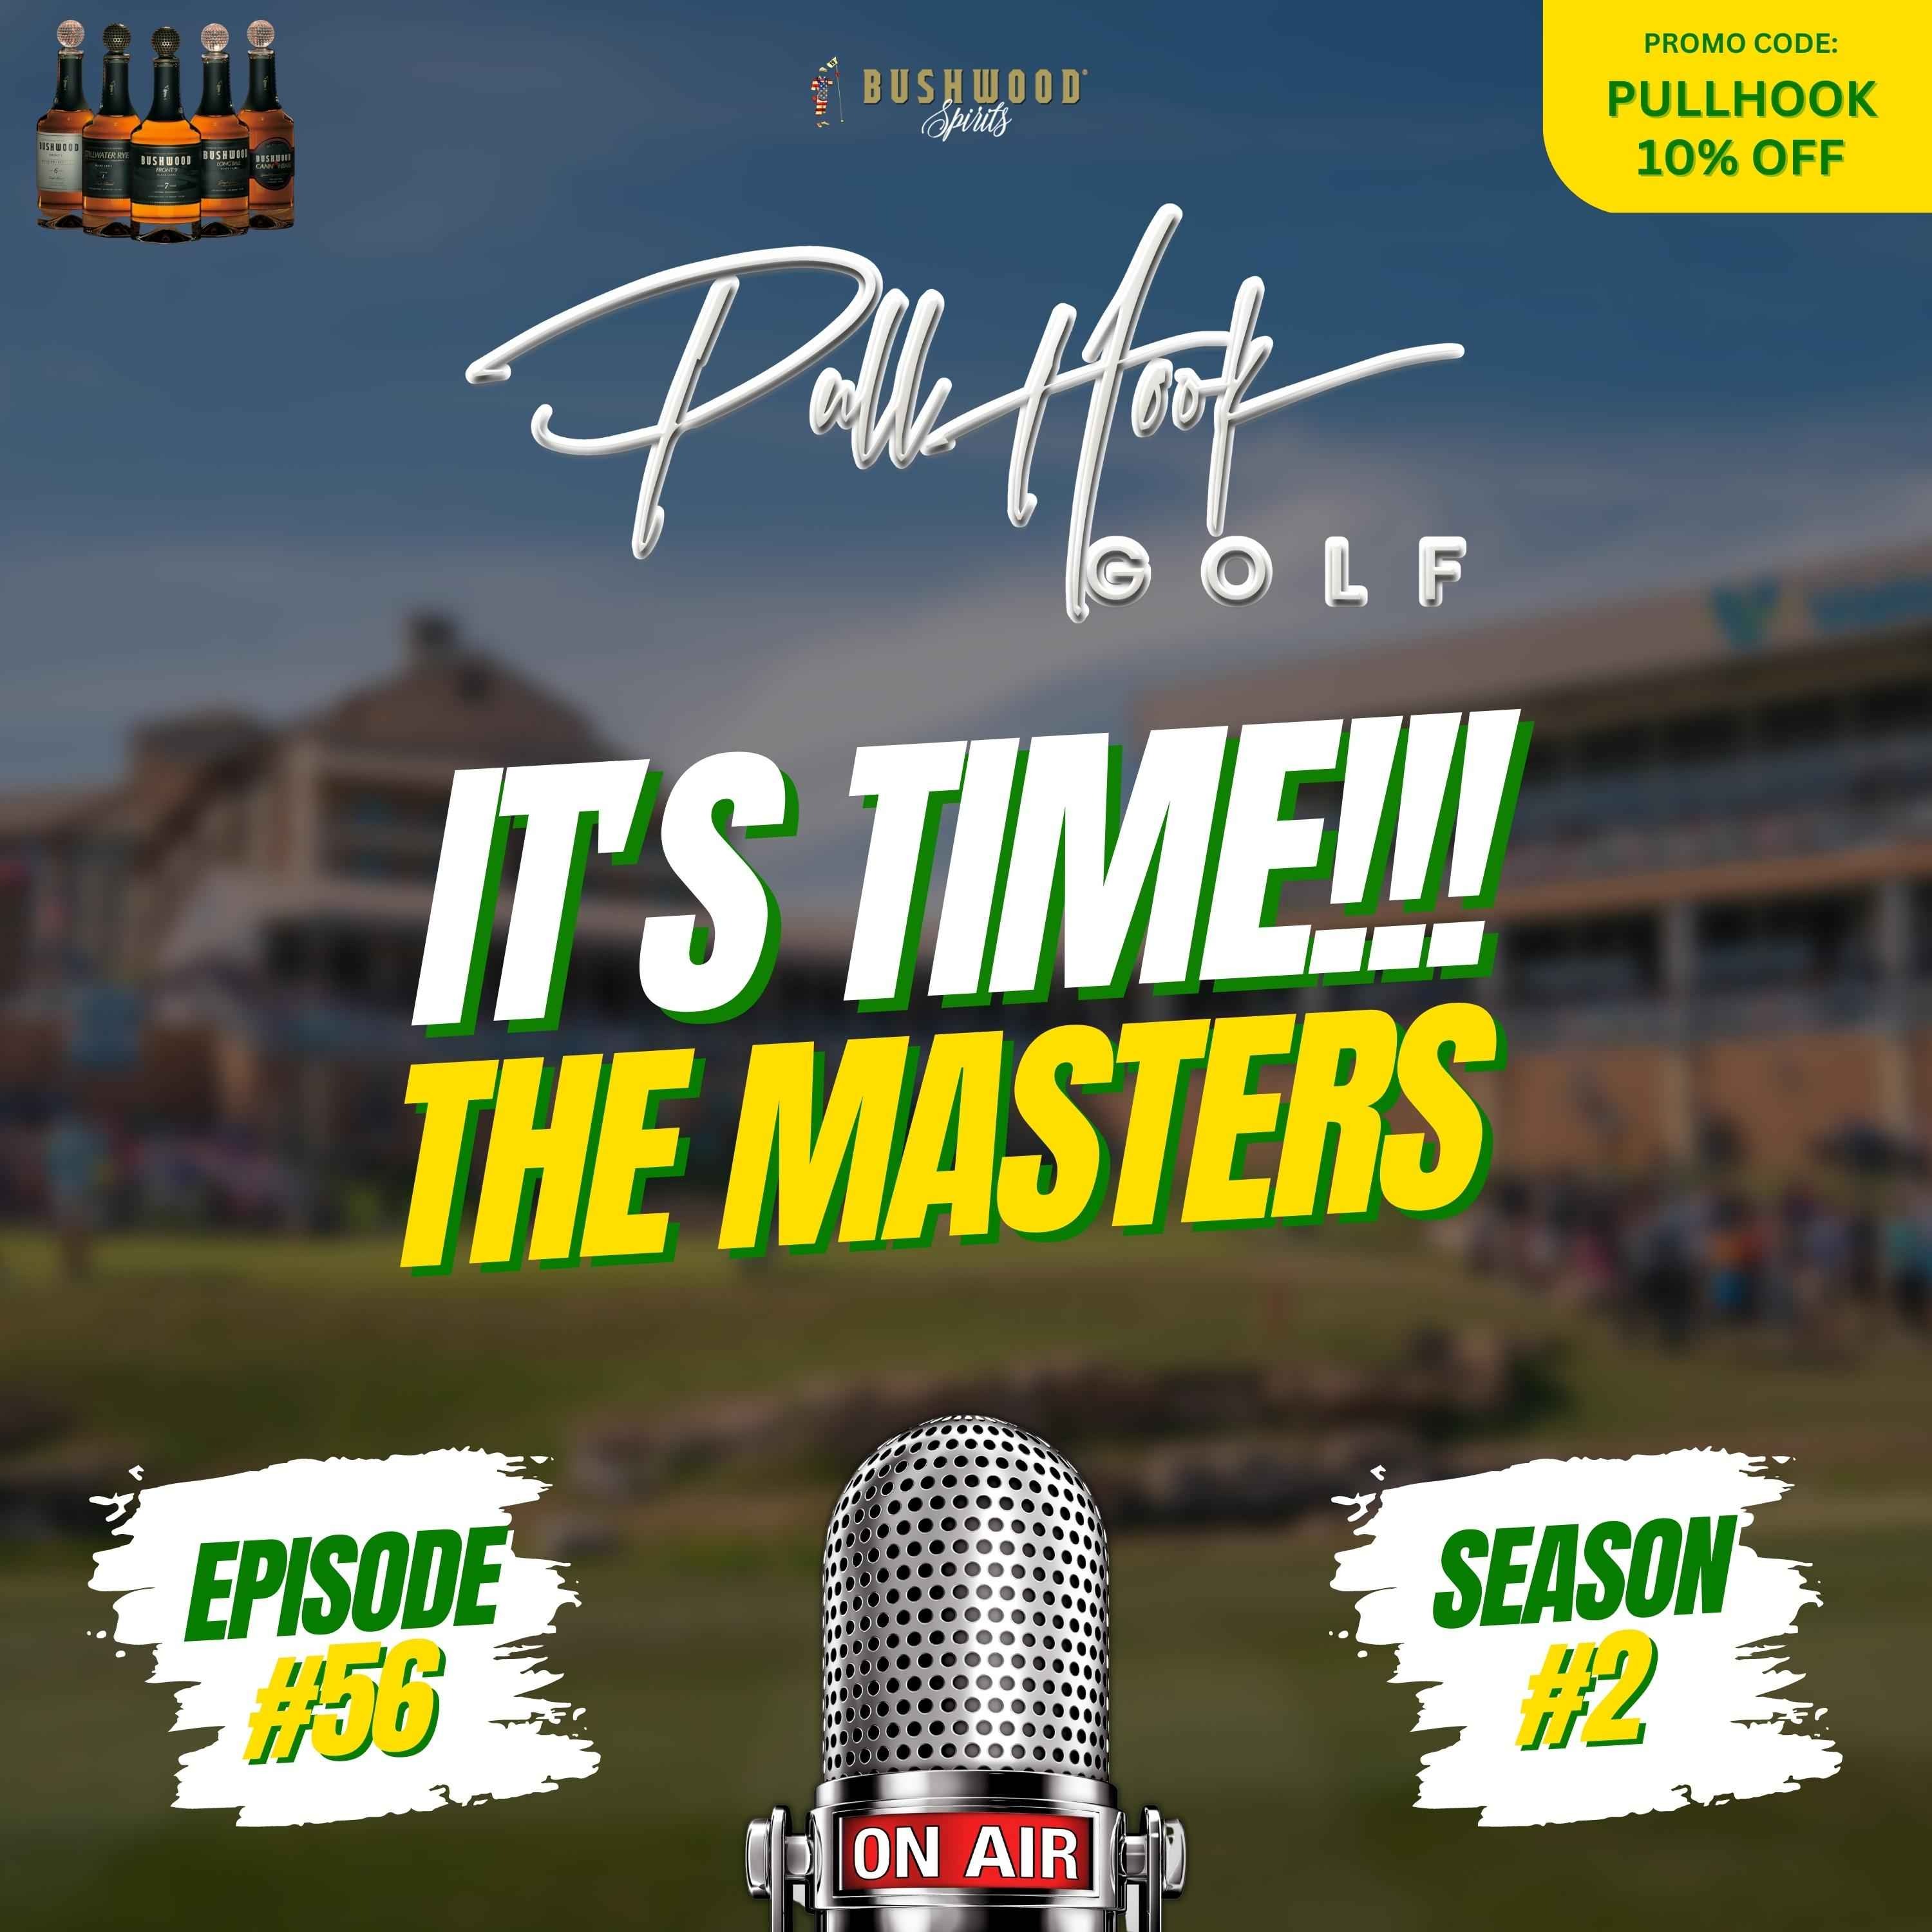 It's Time!!! The Masters